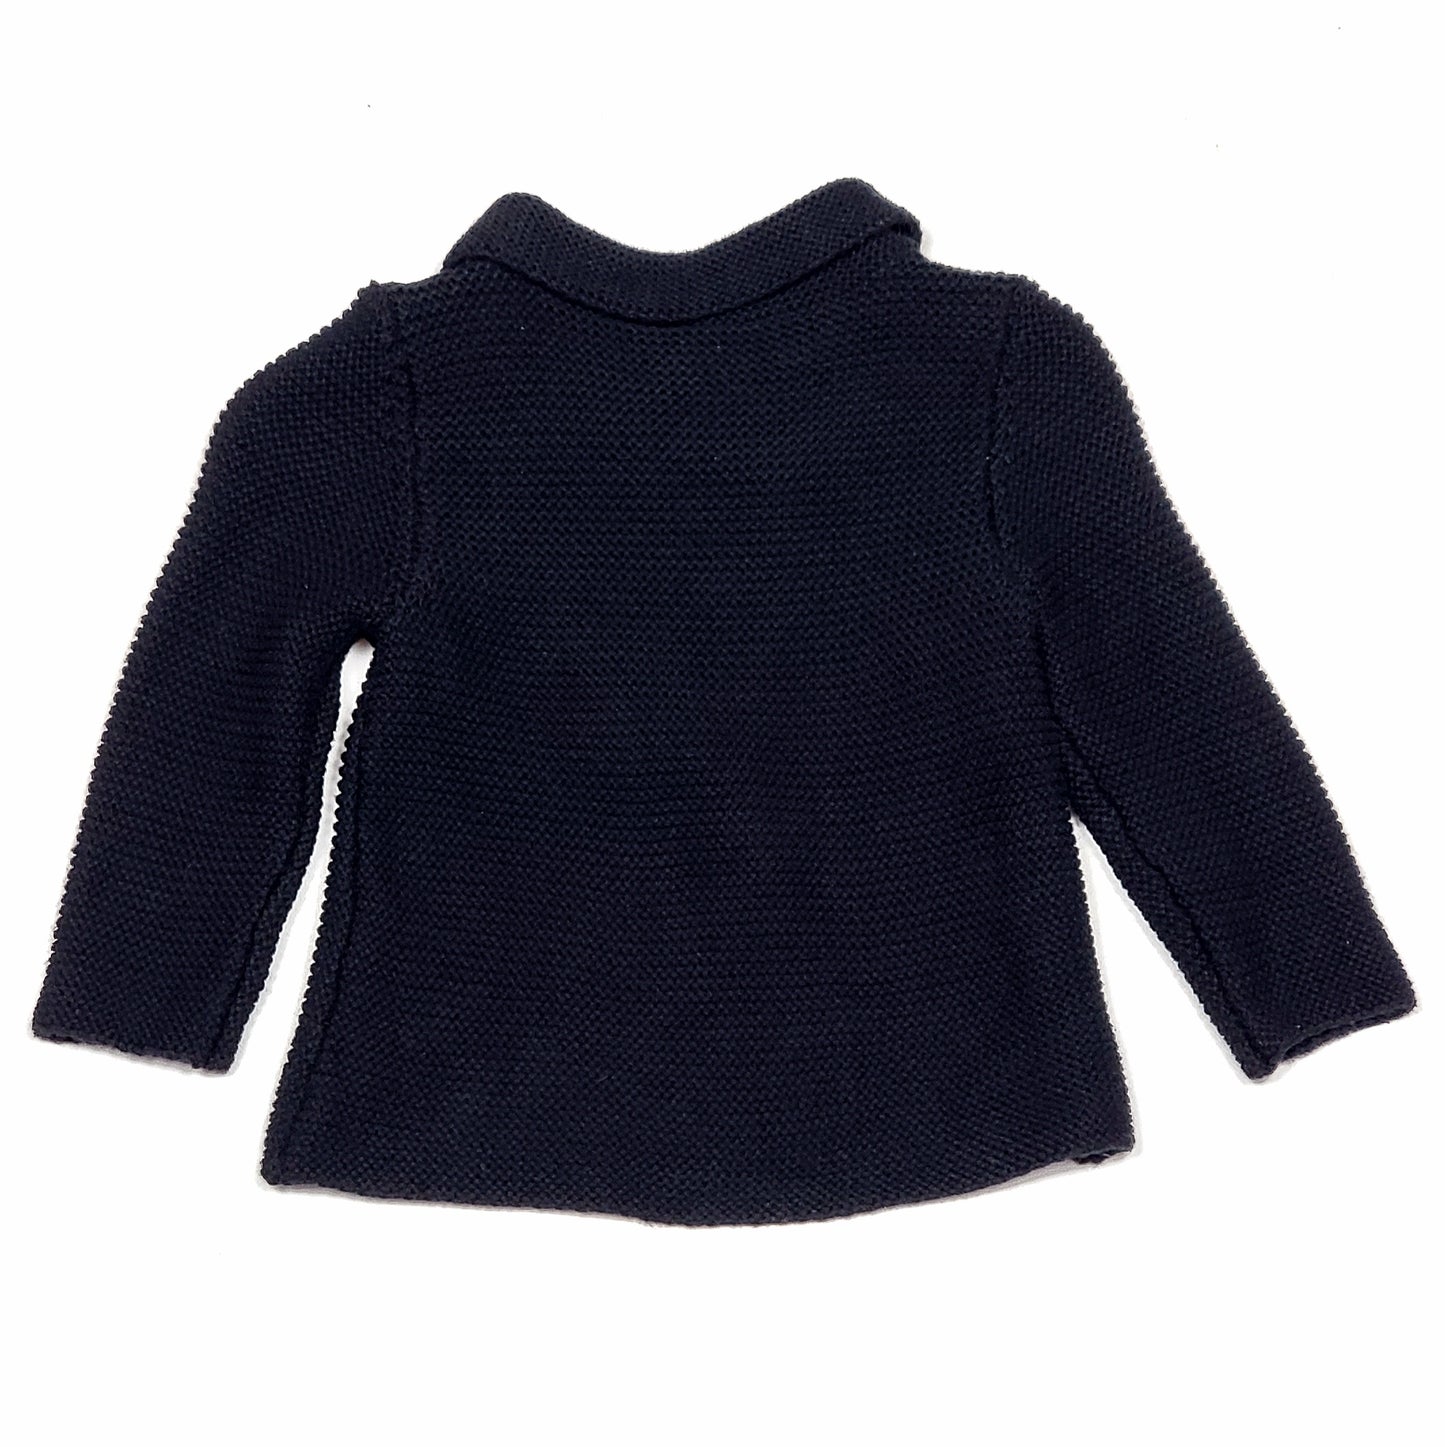 Old Navy Girls Black Cardigan Sweater 6 Months Used View 3